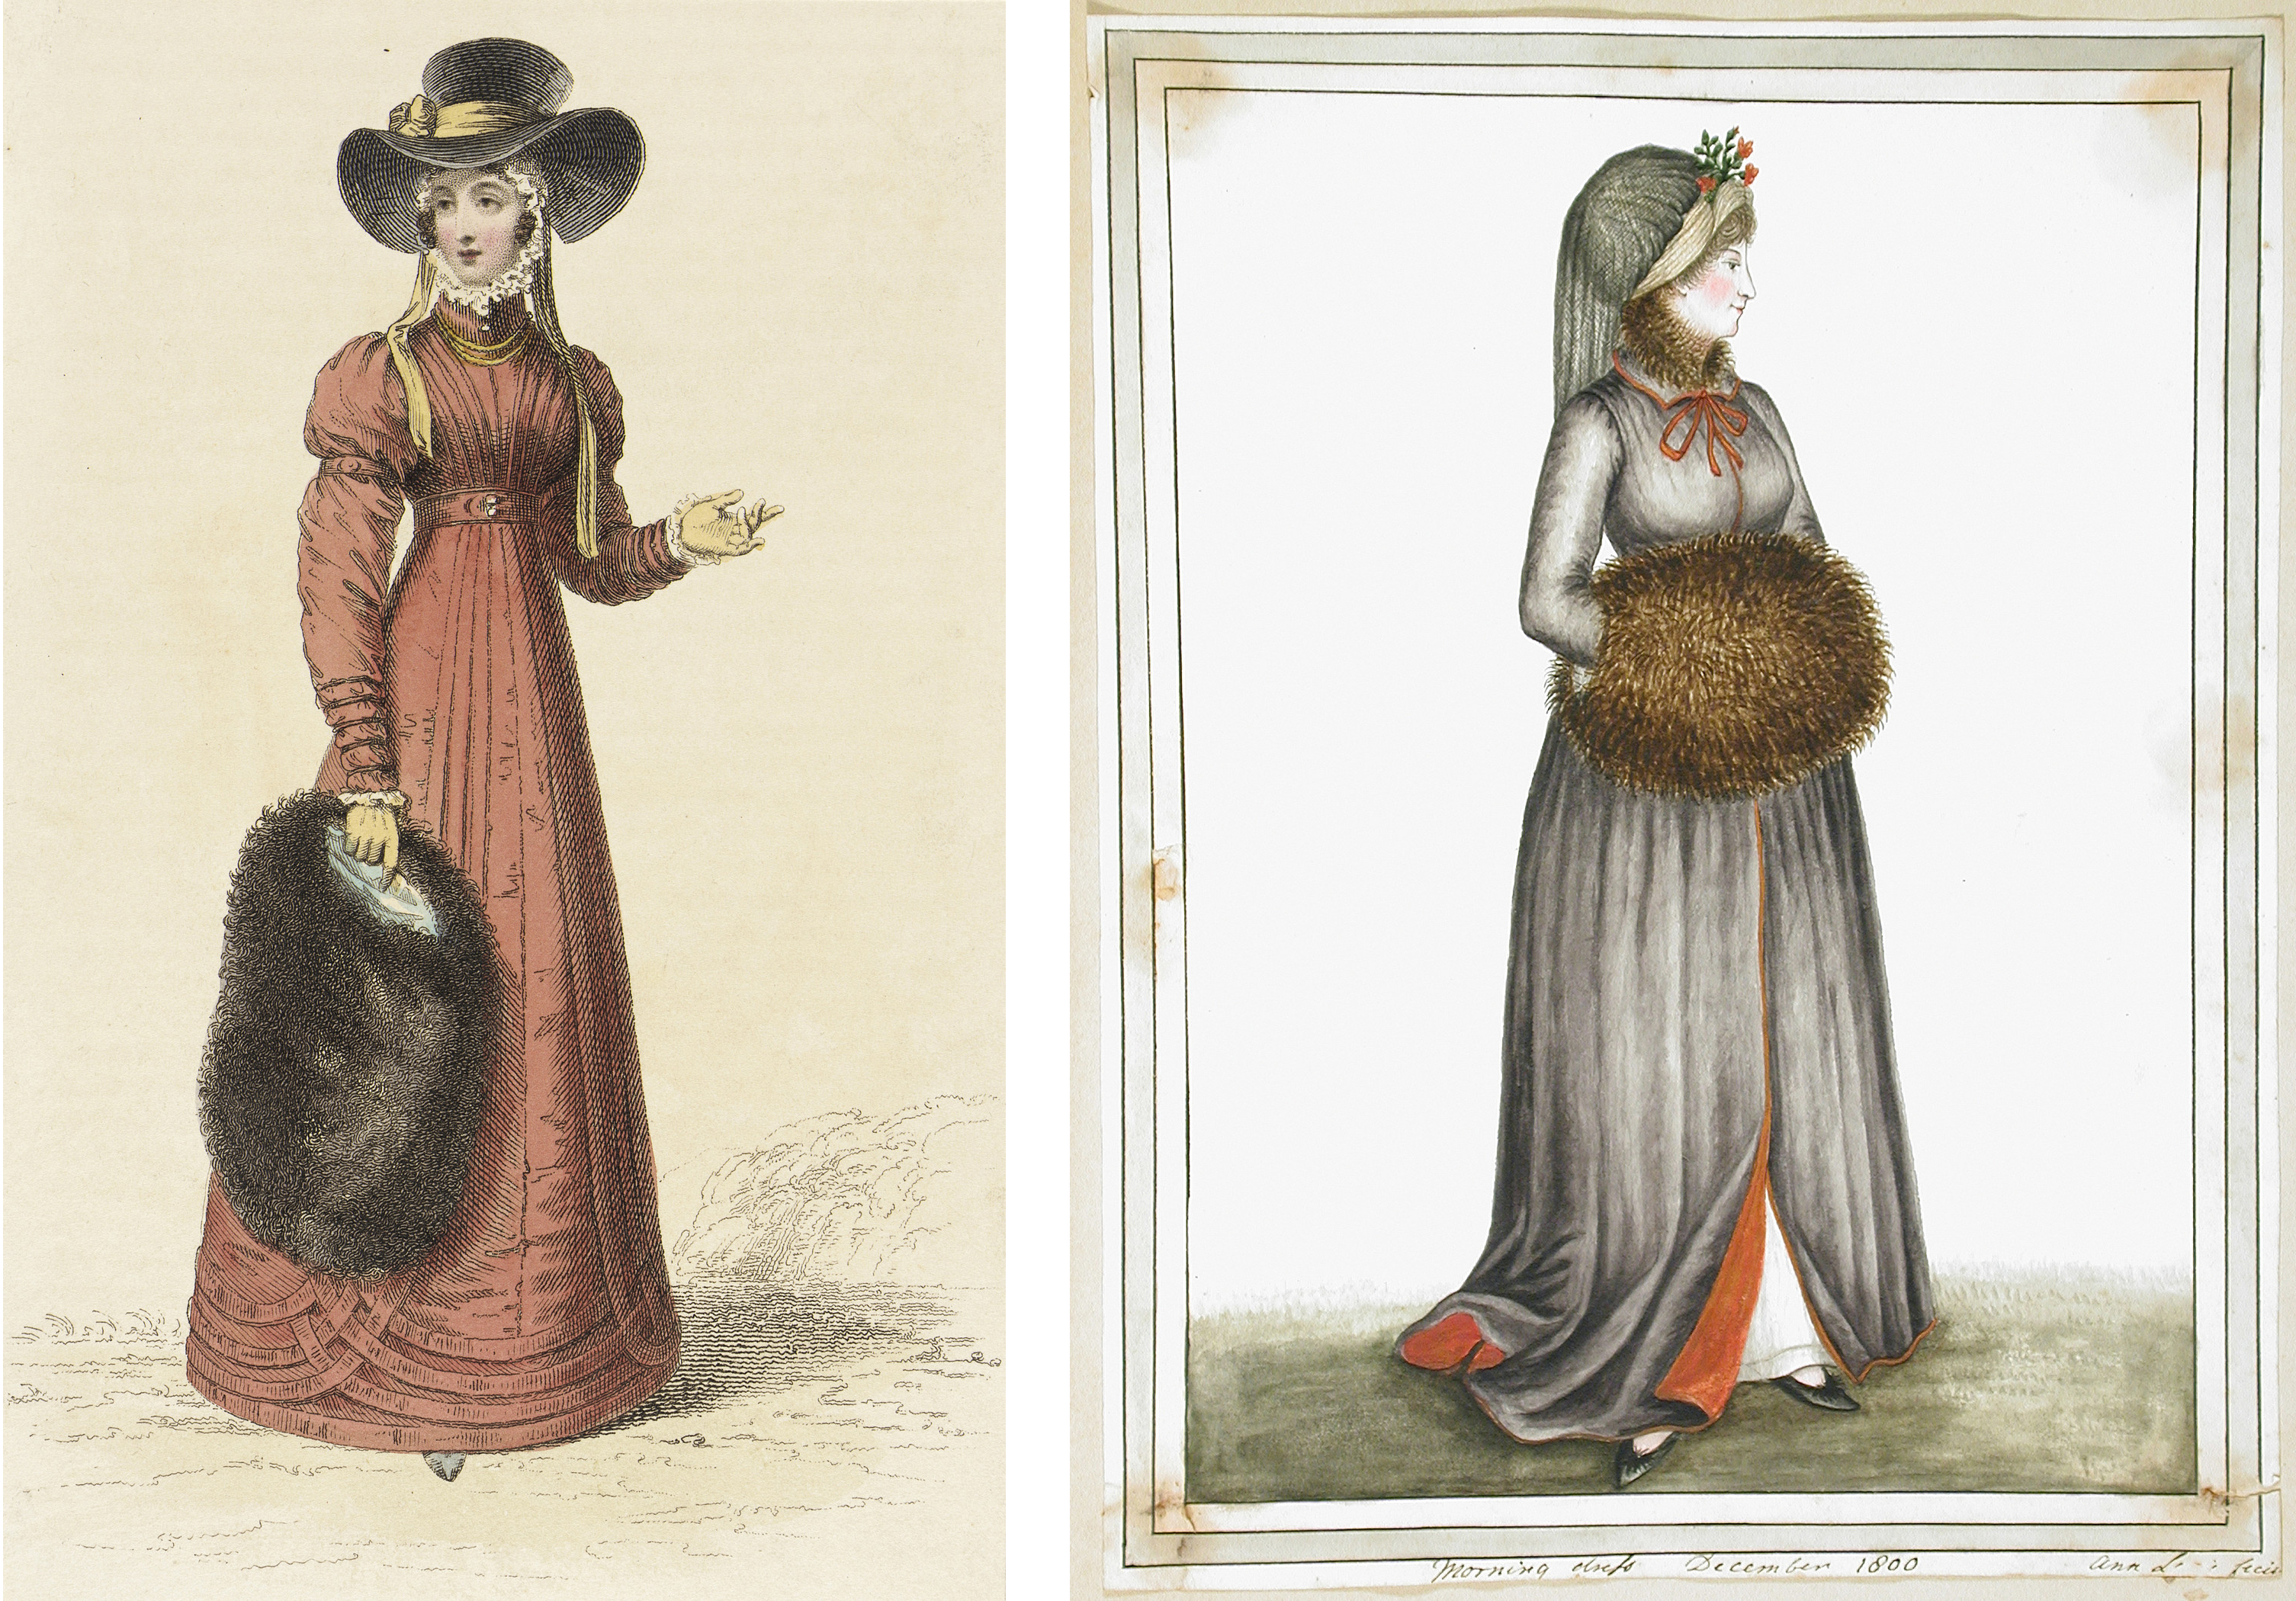 Left: Rudolph Ackermann, Fashion Plate, ‘Promenade Dress’ for ‘The Repository of Arts’, February 1, 1825, Los Angeles County Museum of Art, gift of Charles LeMaire, photo © Museum Associates/LACMA; Right: Ann Frankland Lewis, Collection of English Original Watercolour Drawings: Morning Dress, December 1800, 1800, Los Angeles County Museum of Art, Costume Council Fund, photo © Museum Associates/LACMA